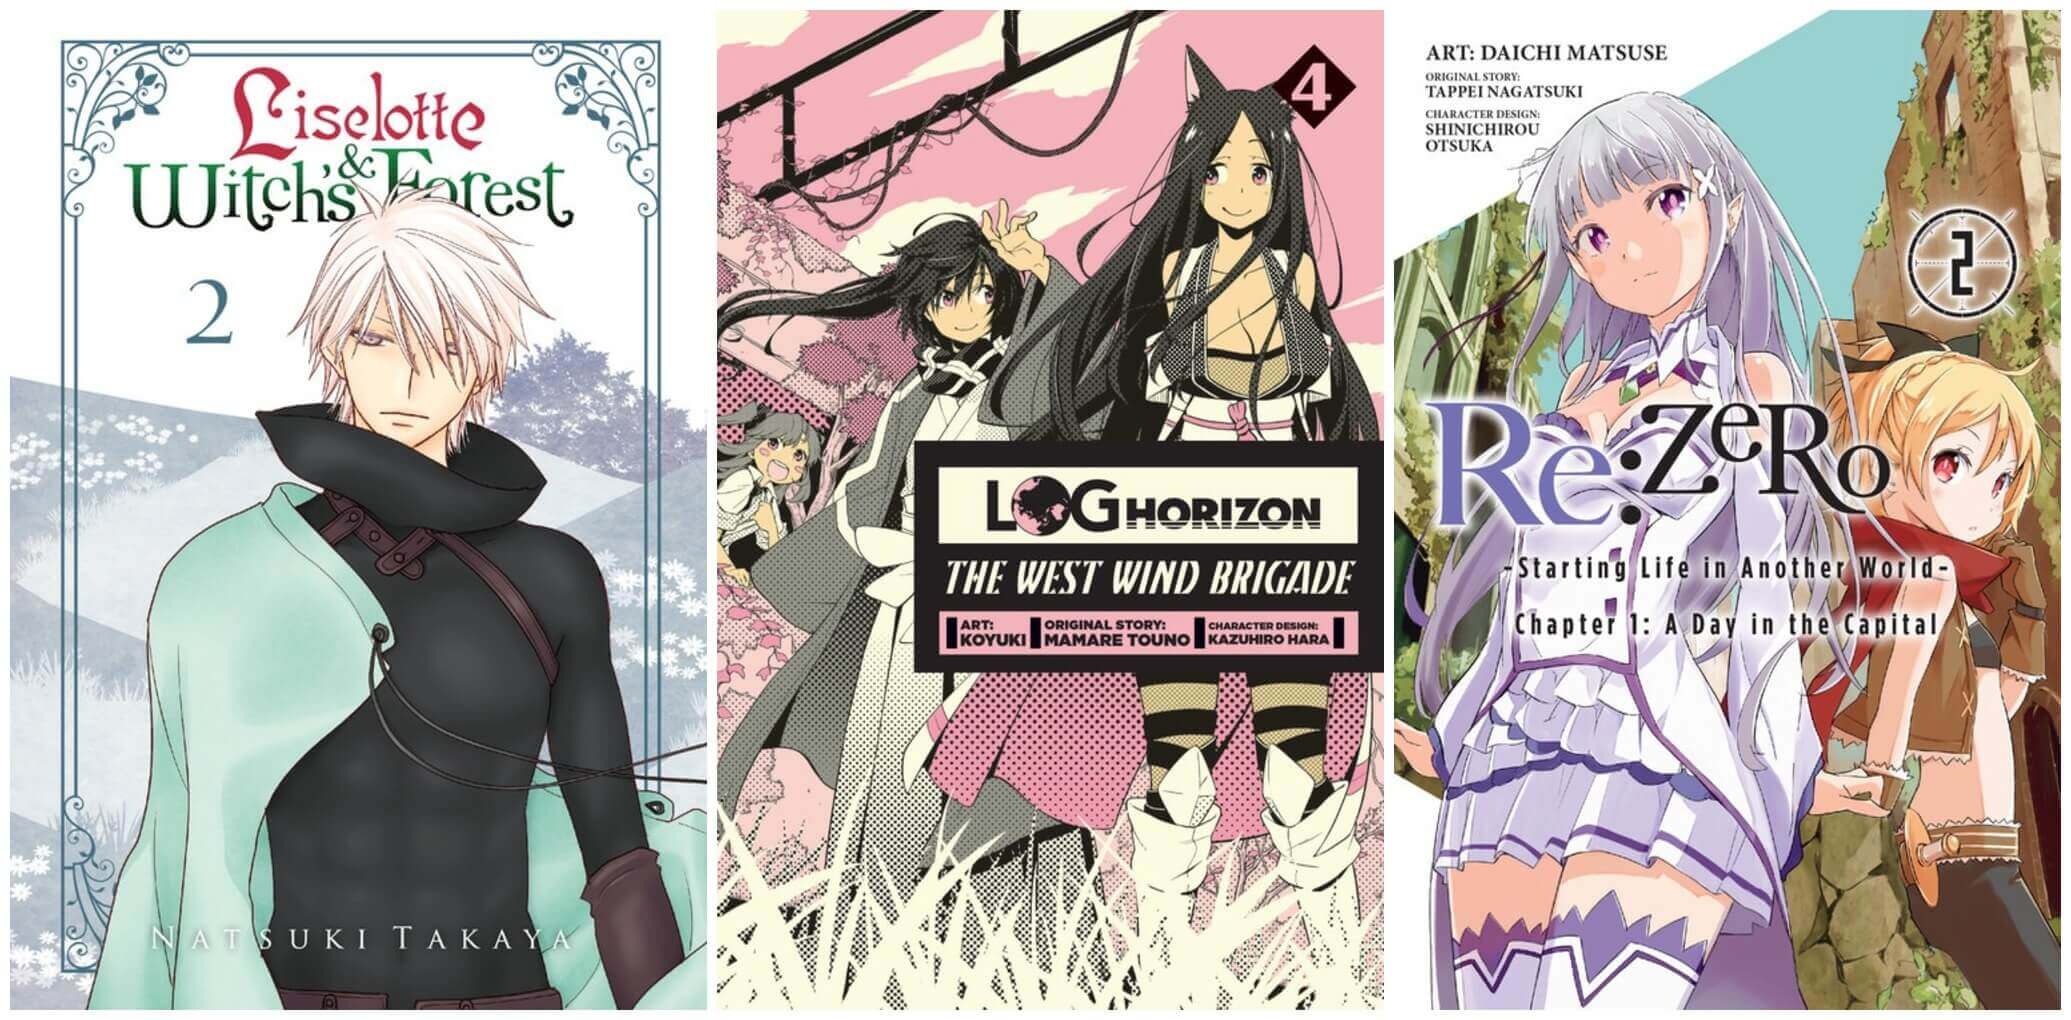 October 2016 Manga Releases Covers for Liselotte & Witch's Forest, Log Horizon: The West Wind Brigade, and Re:ZERO.